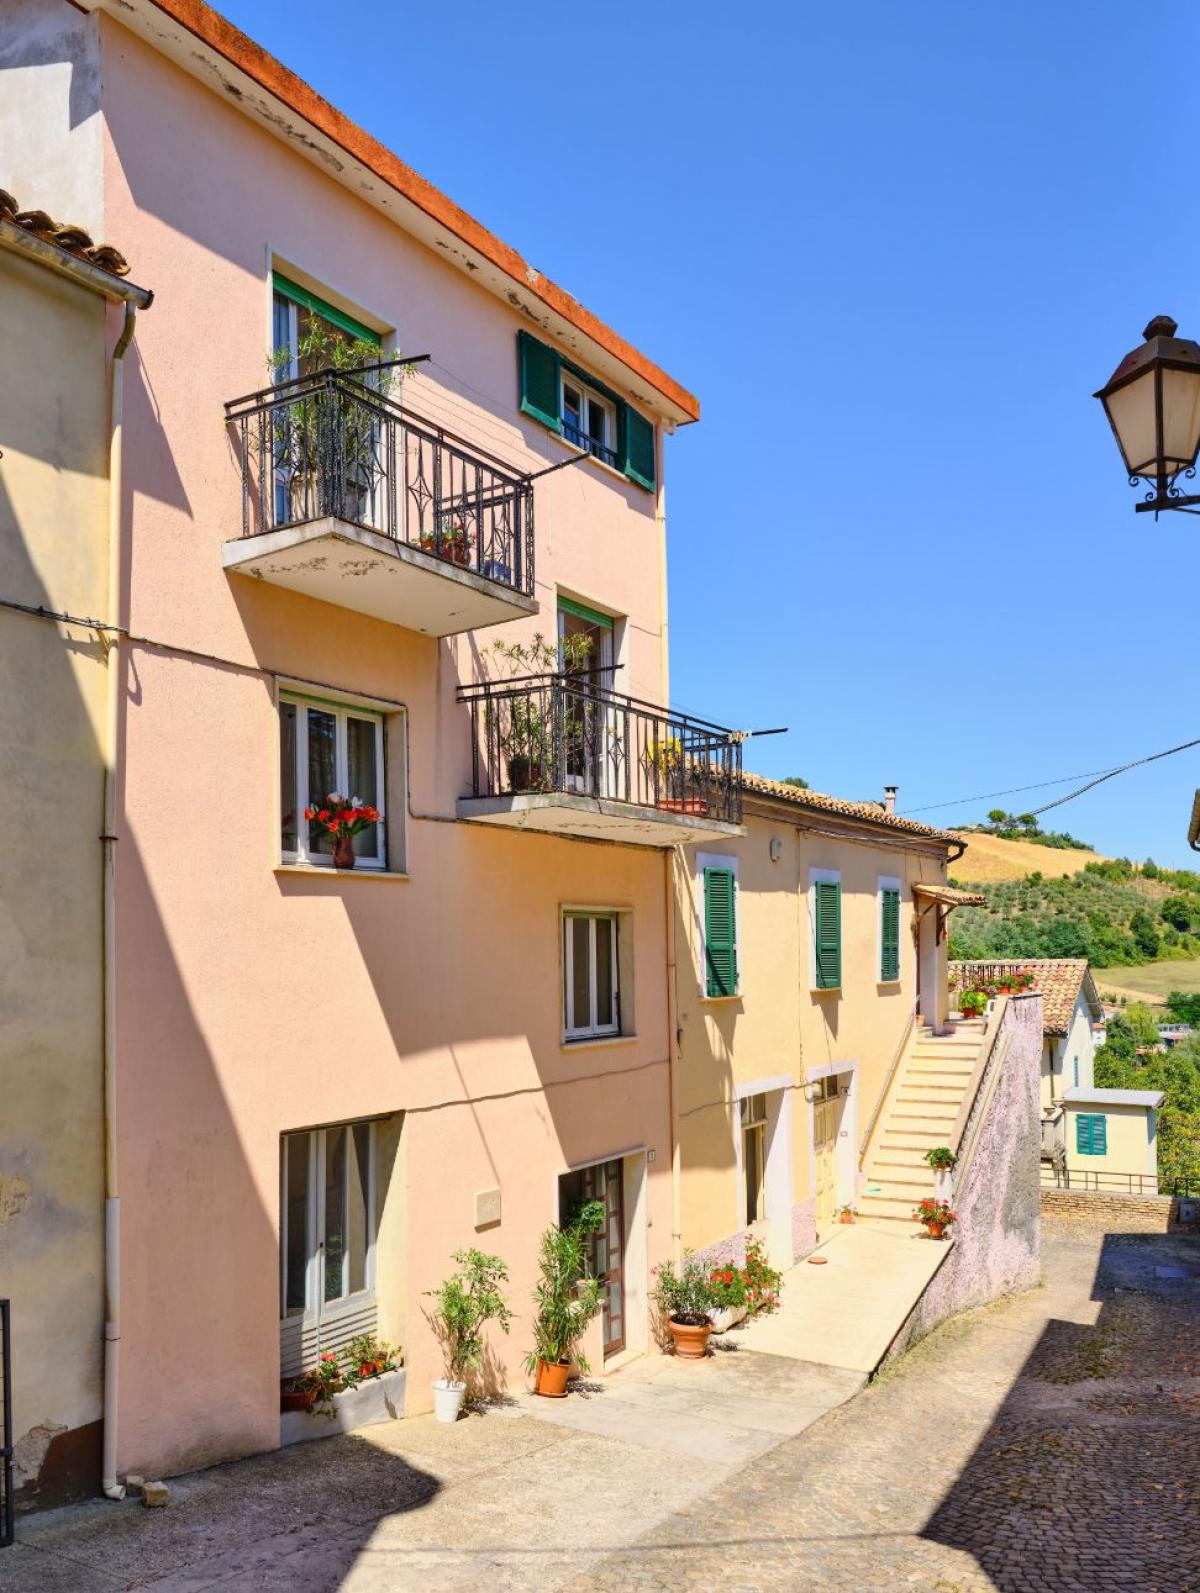 Picture of Home For Sale in Rotella, Marche, Italy